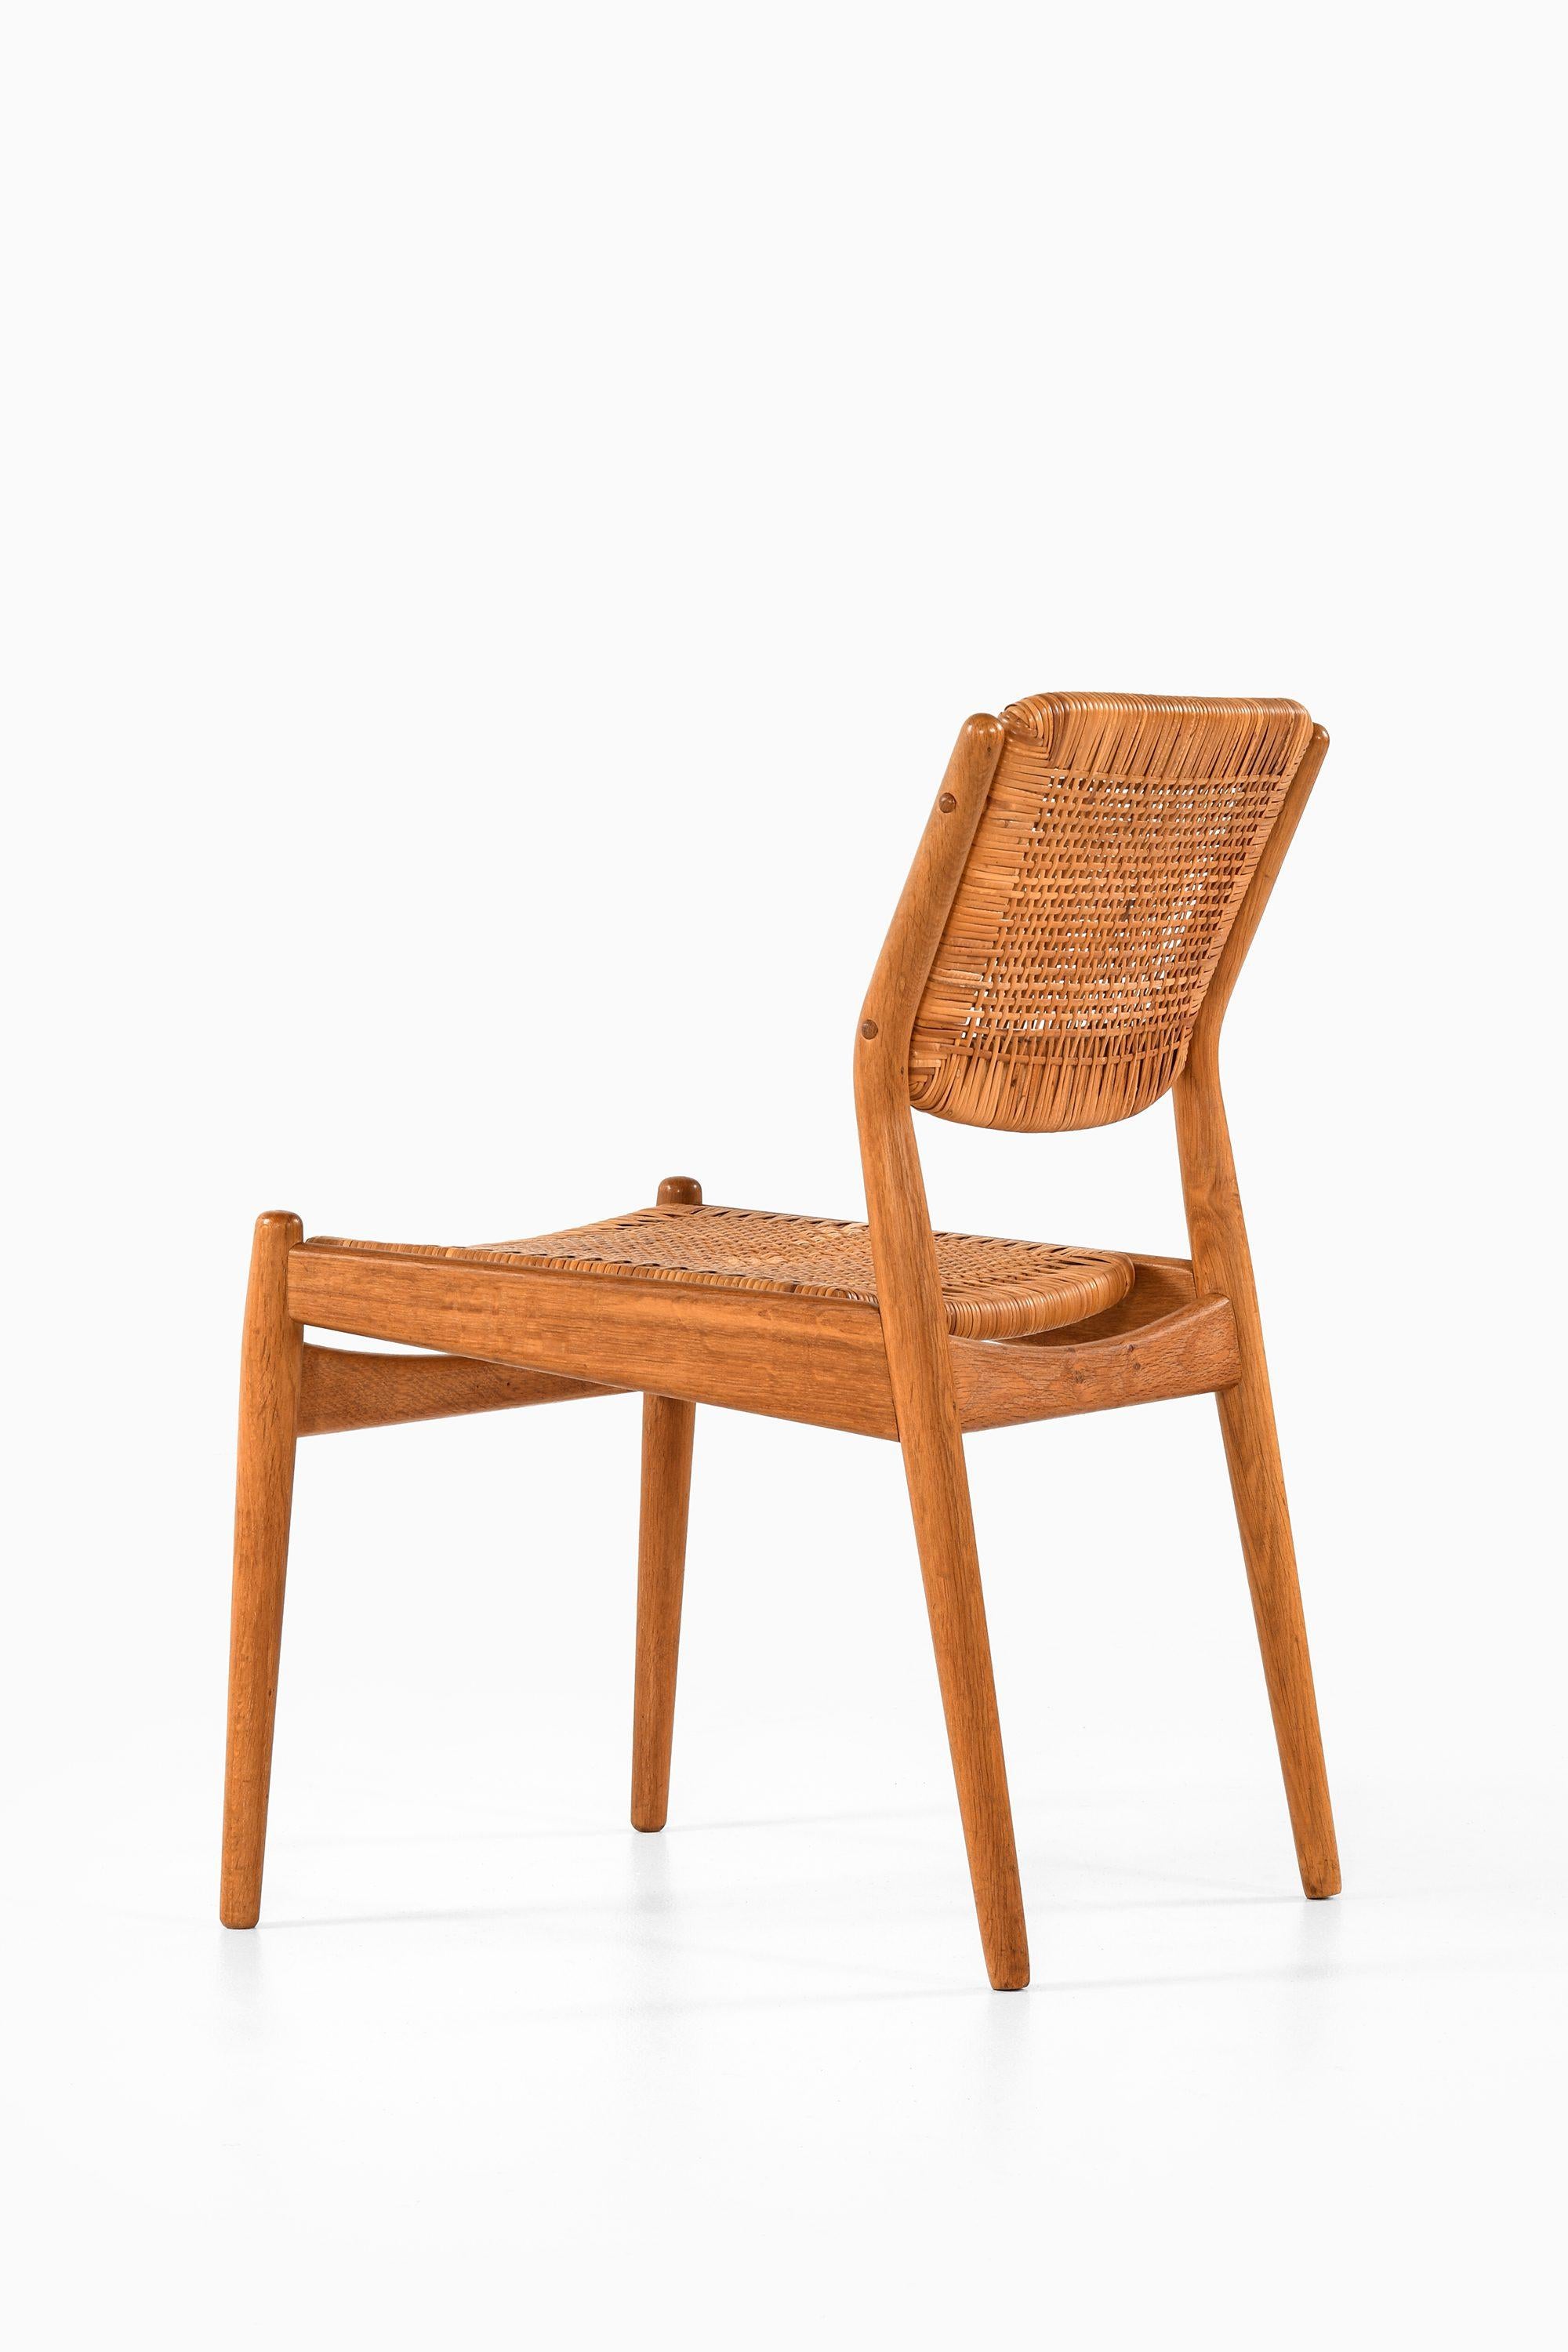 Danish Set of 8 Dining Chairs in Oak and Woven Cane by Arne Vodder, 1951 For Sale